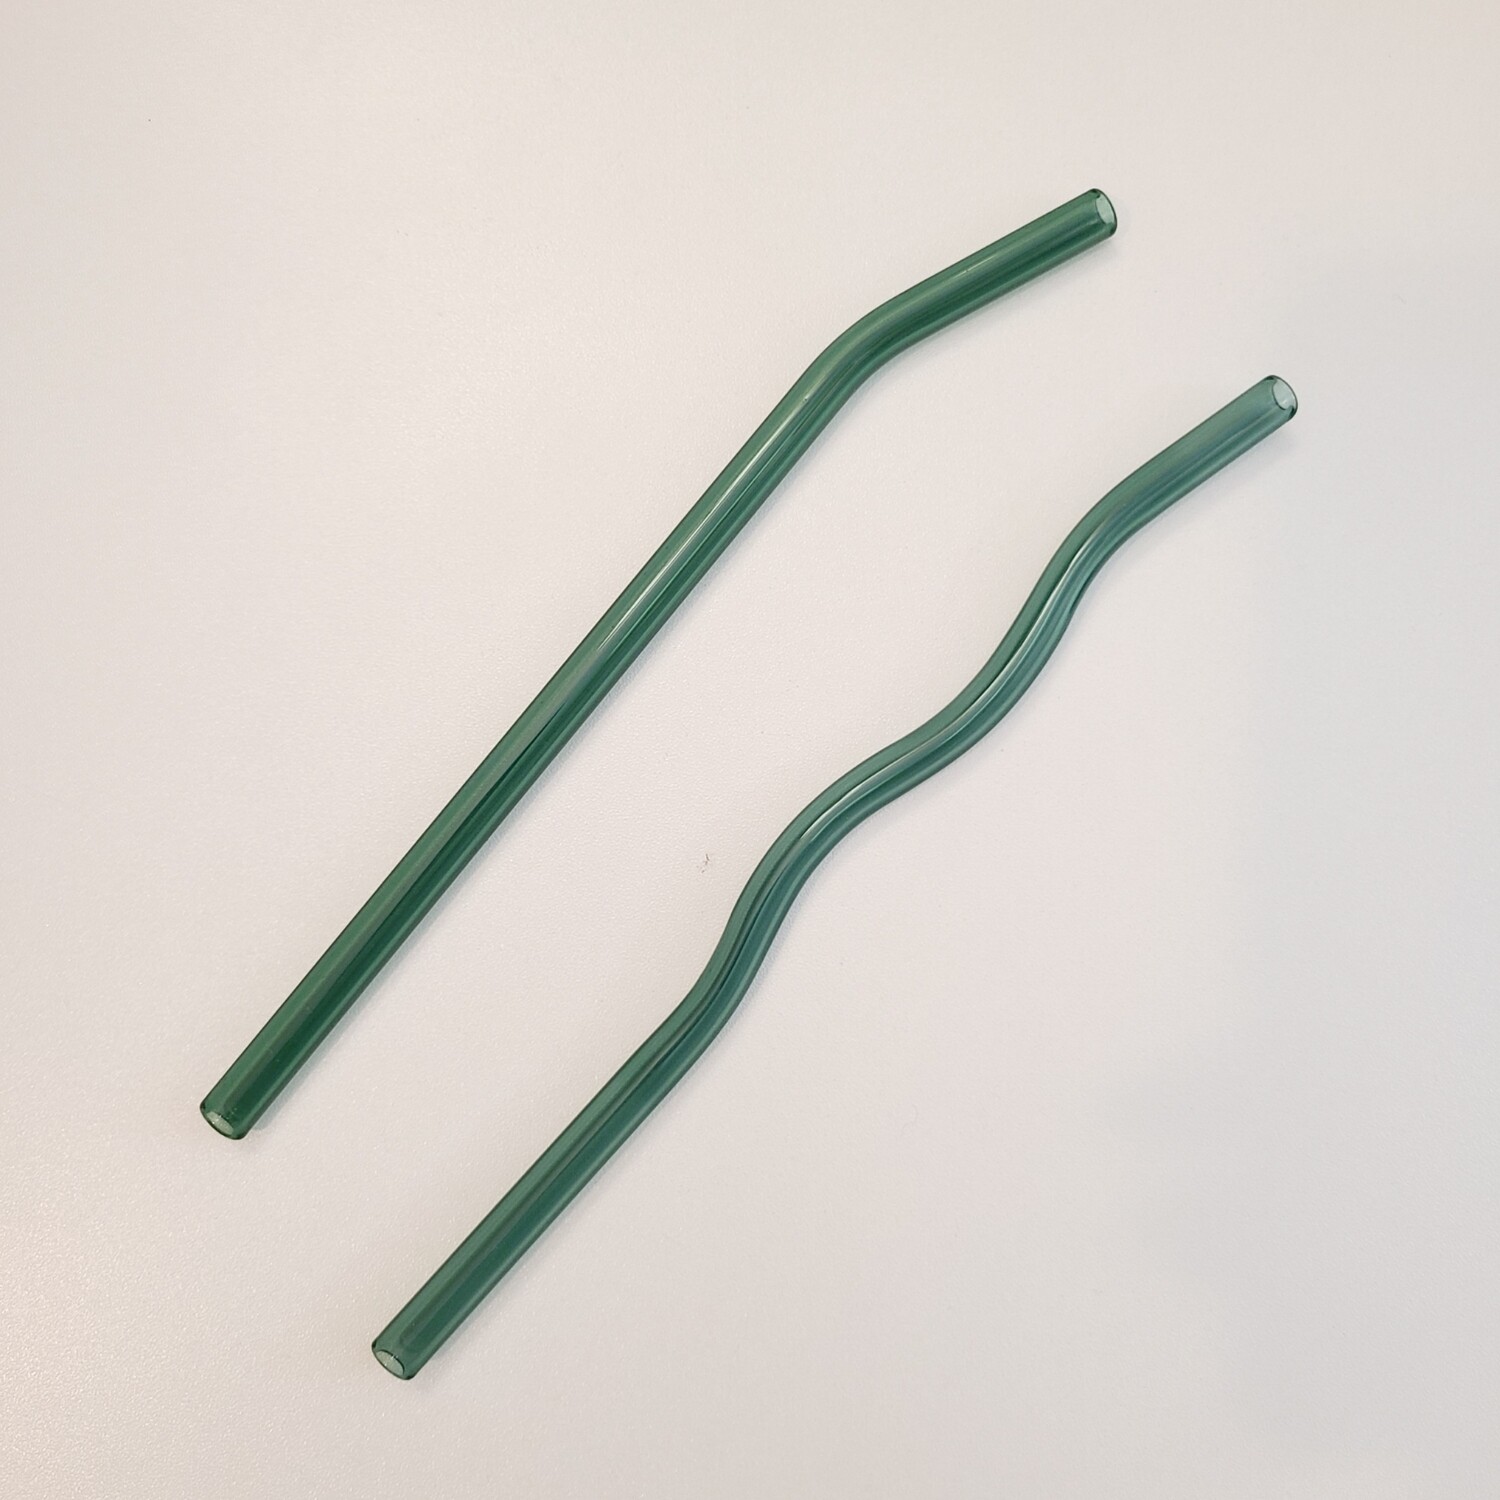 Teal Glass Straw, Shape: Curved